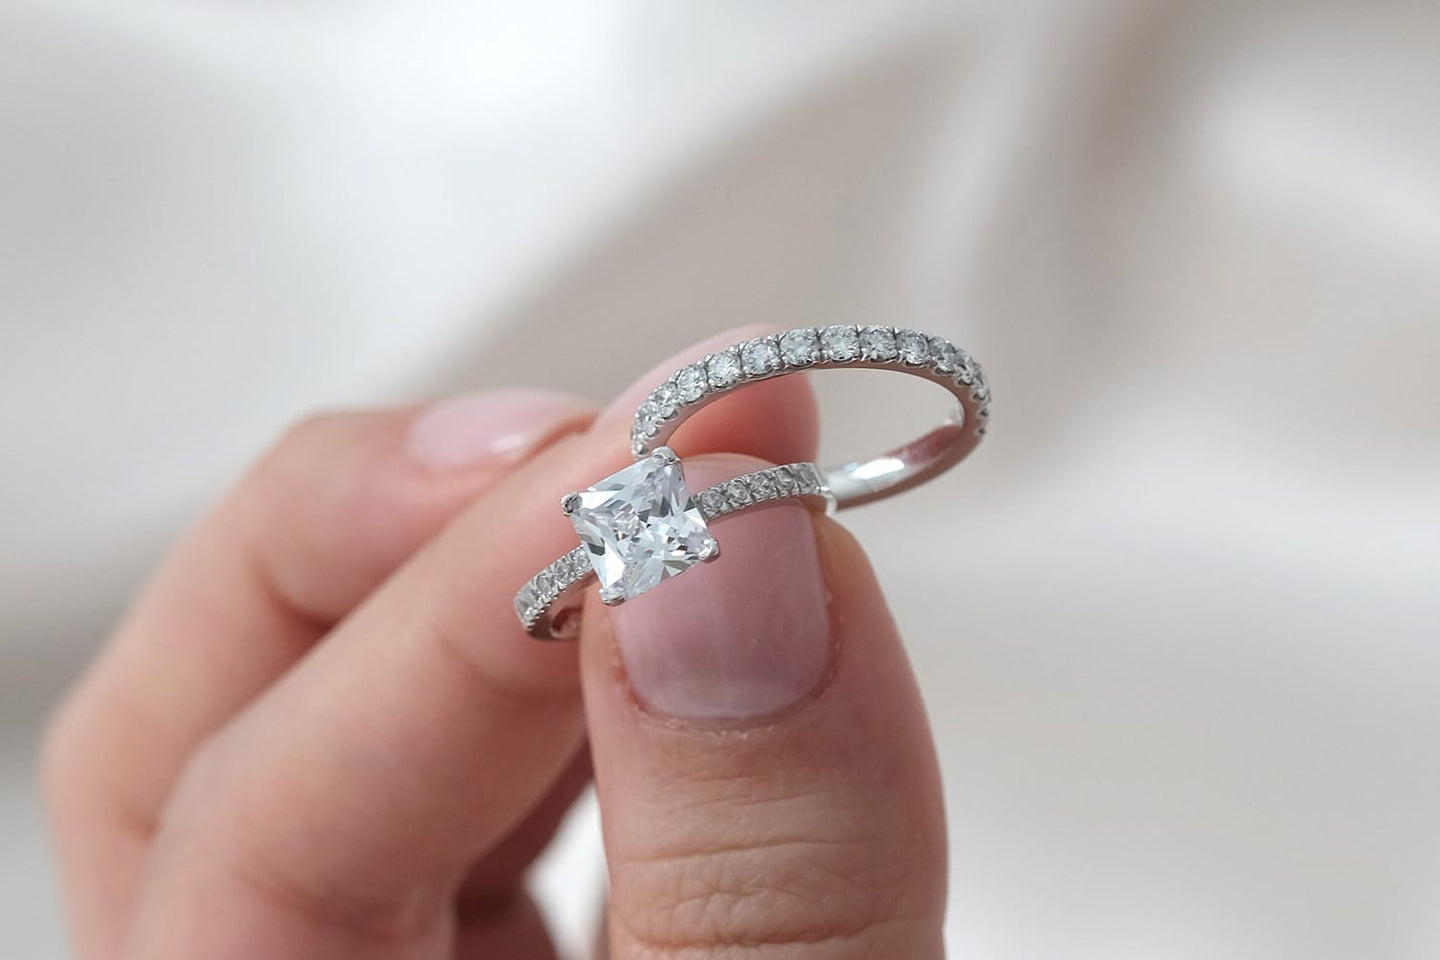 How to Clean a Diamond Ring at Home